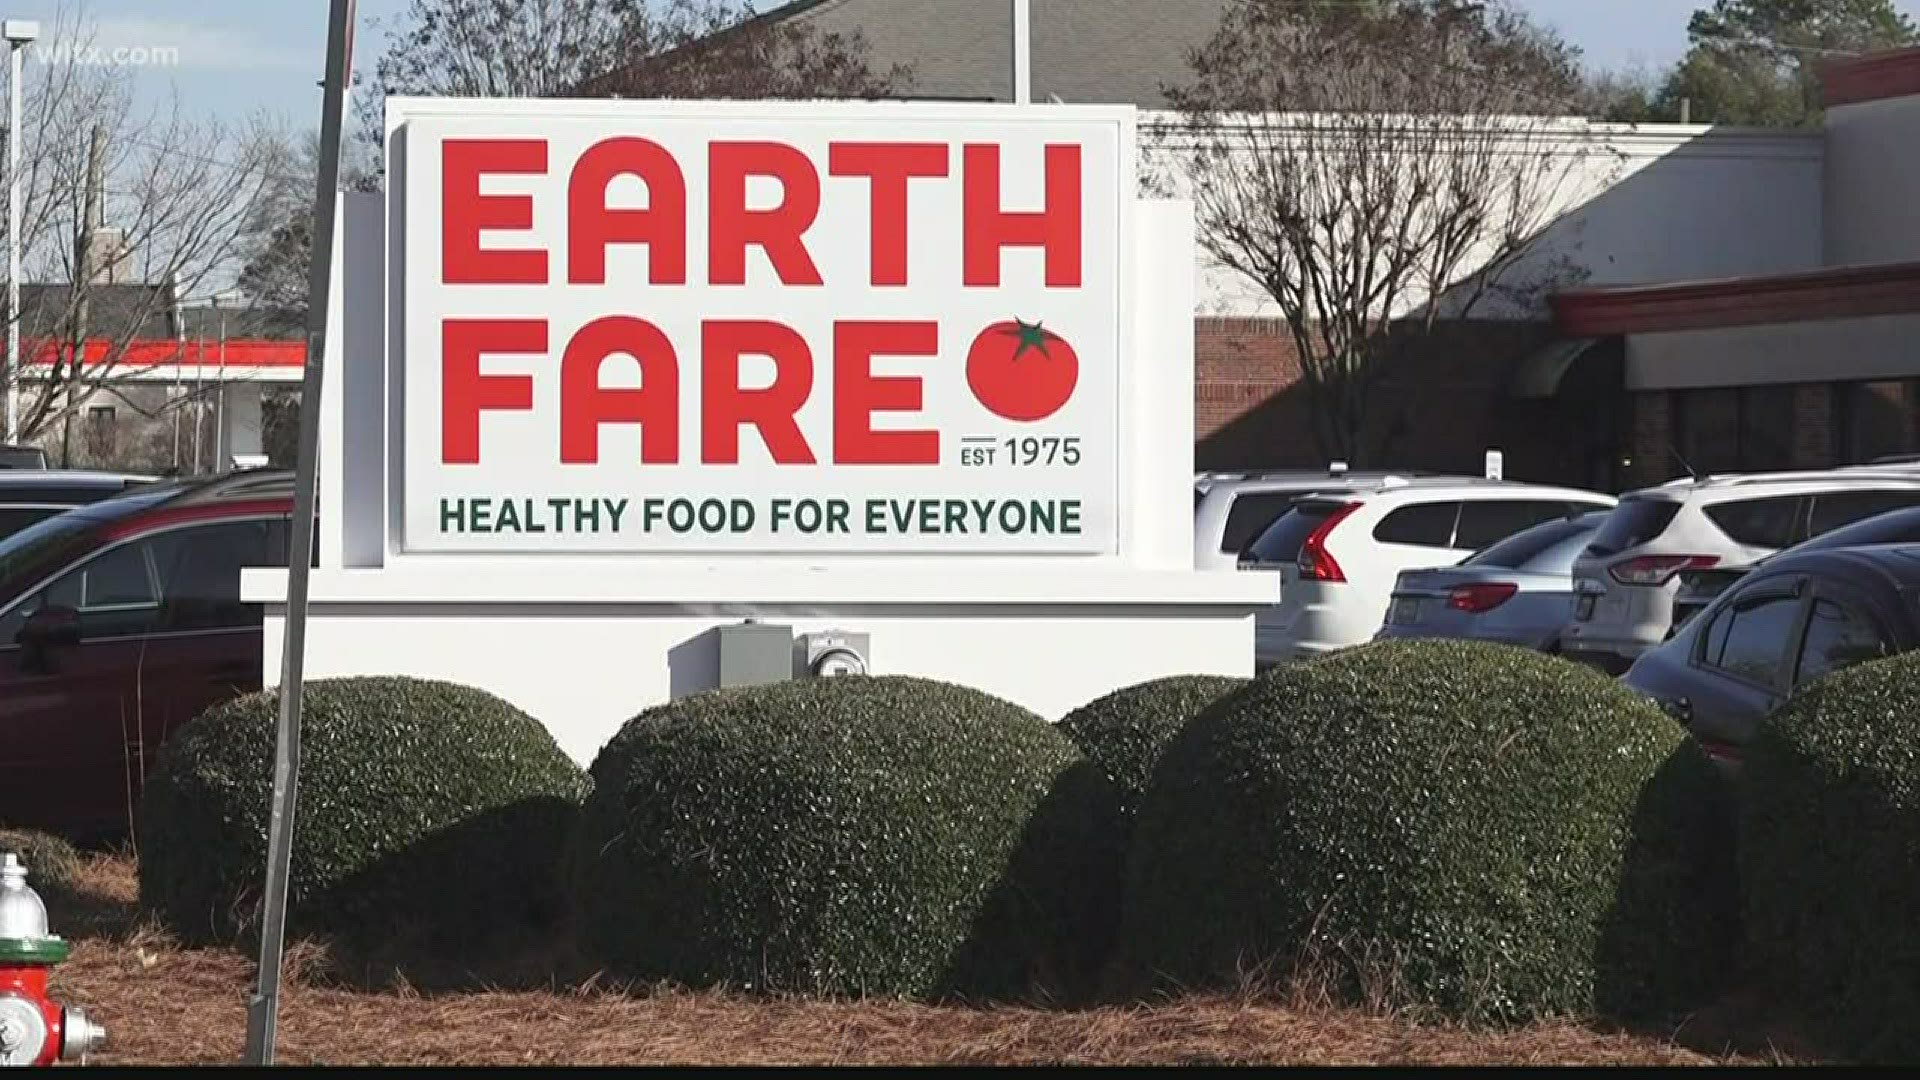 A new company has bought the company name and rights and plans to reopen a total of seven Earth Fare locations, including Columbia.